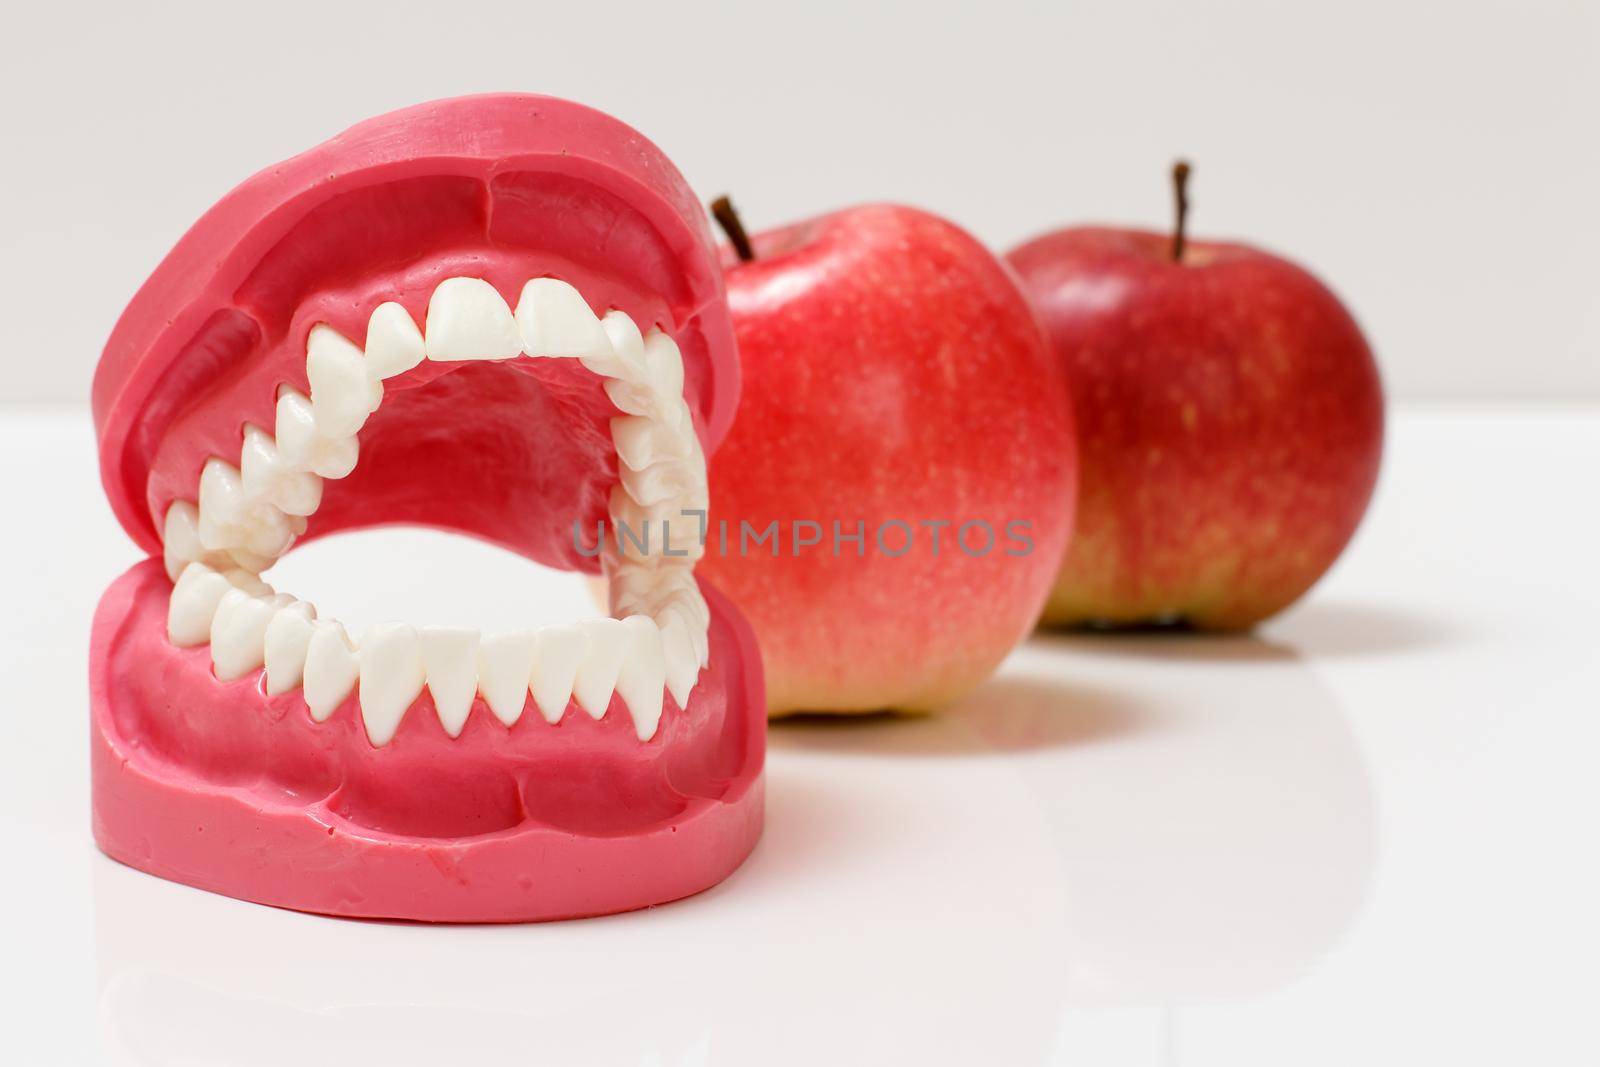 Layout of the human jaw and apples beside it. by mvg6894